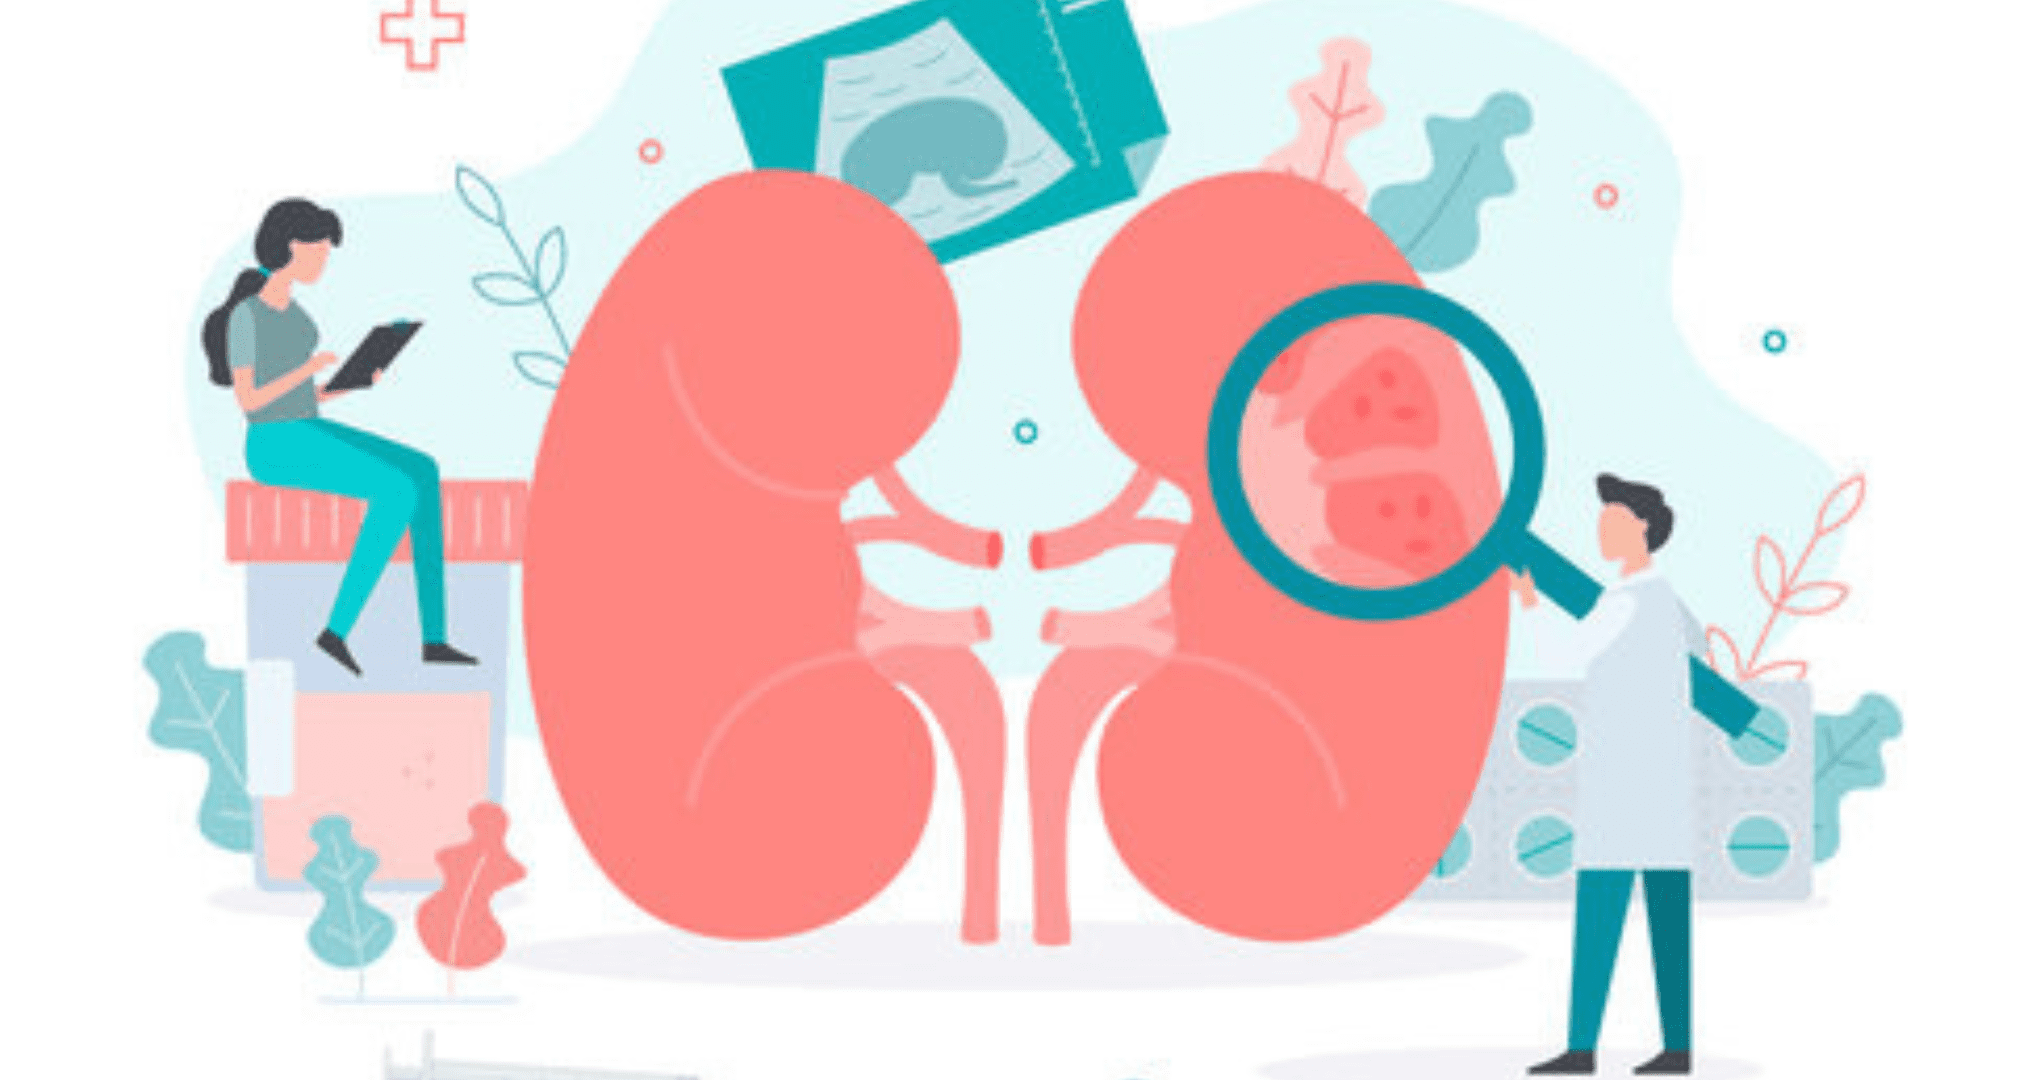 How dehydration can affect the kidneys